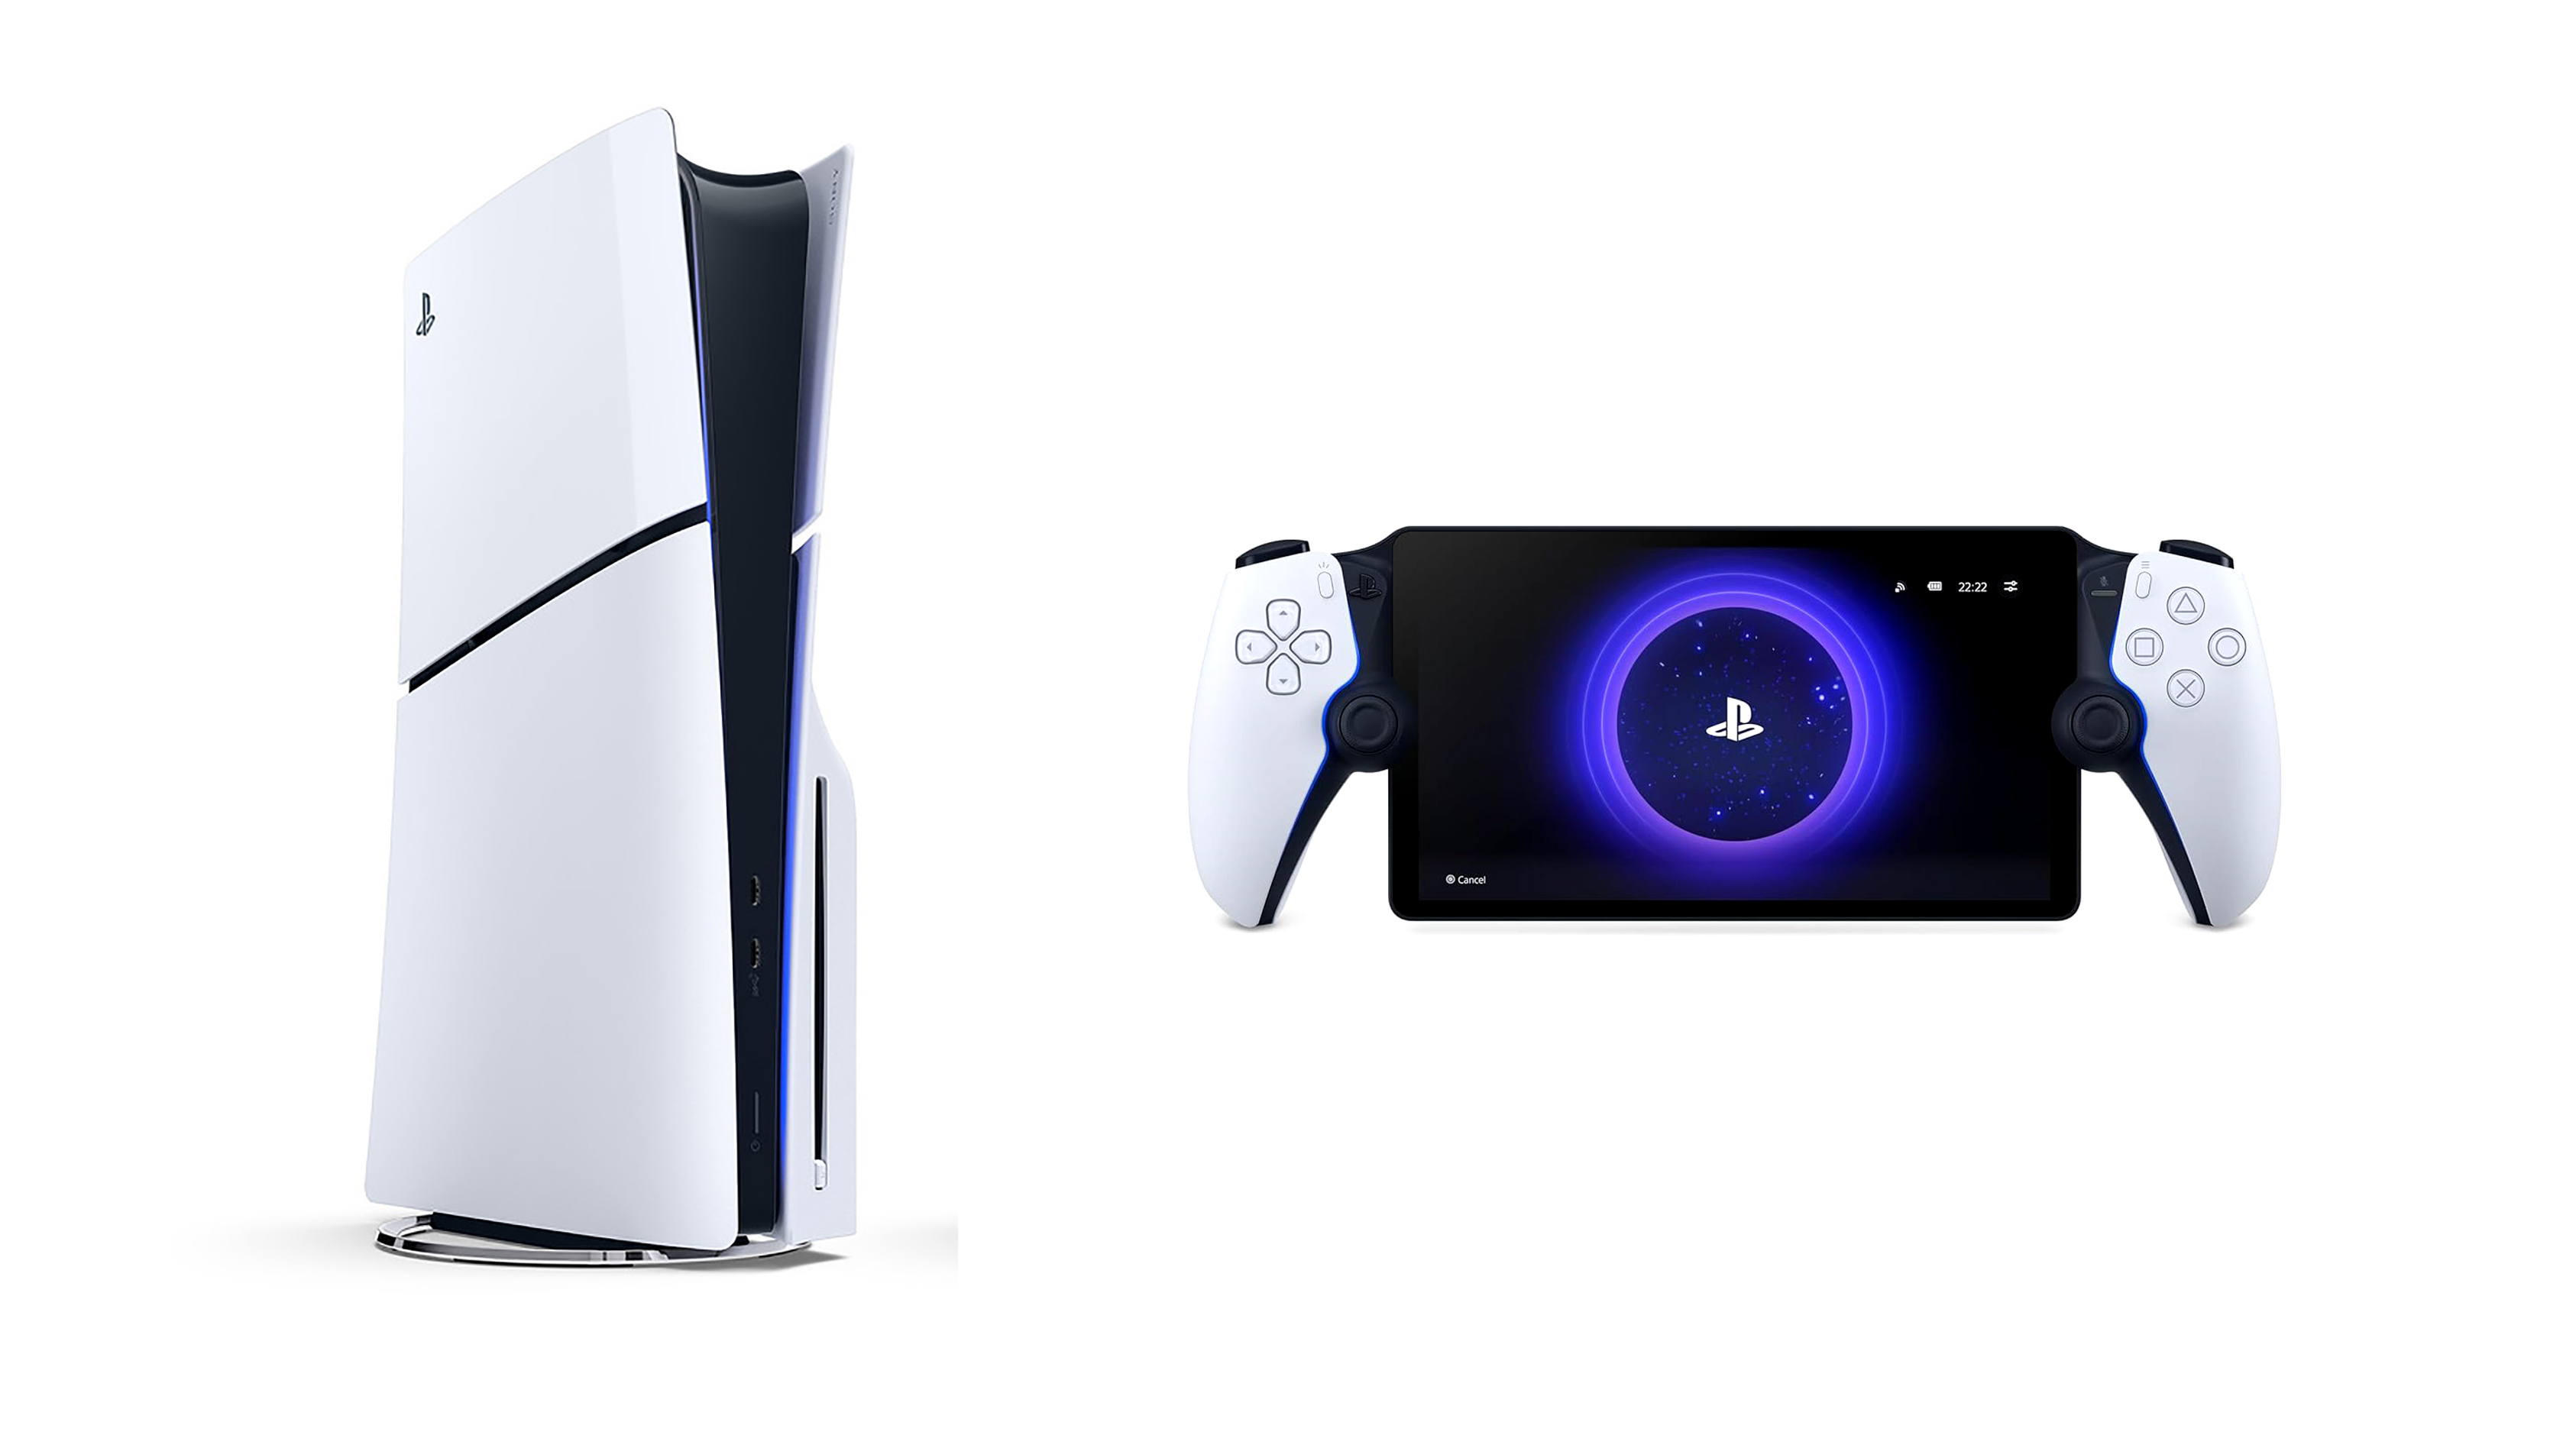 Playstation Portal: Release Date, Price, & Where To Buy?